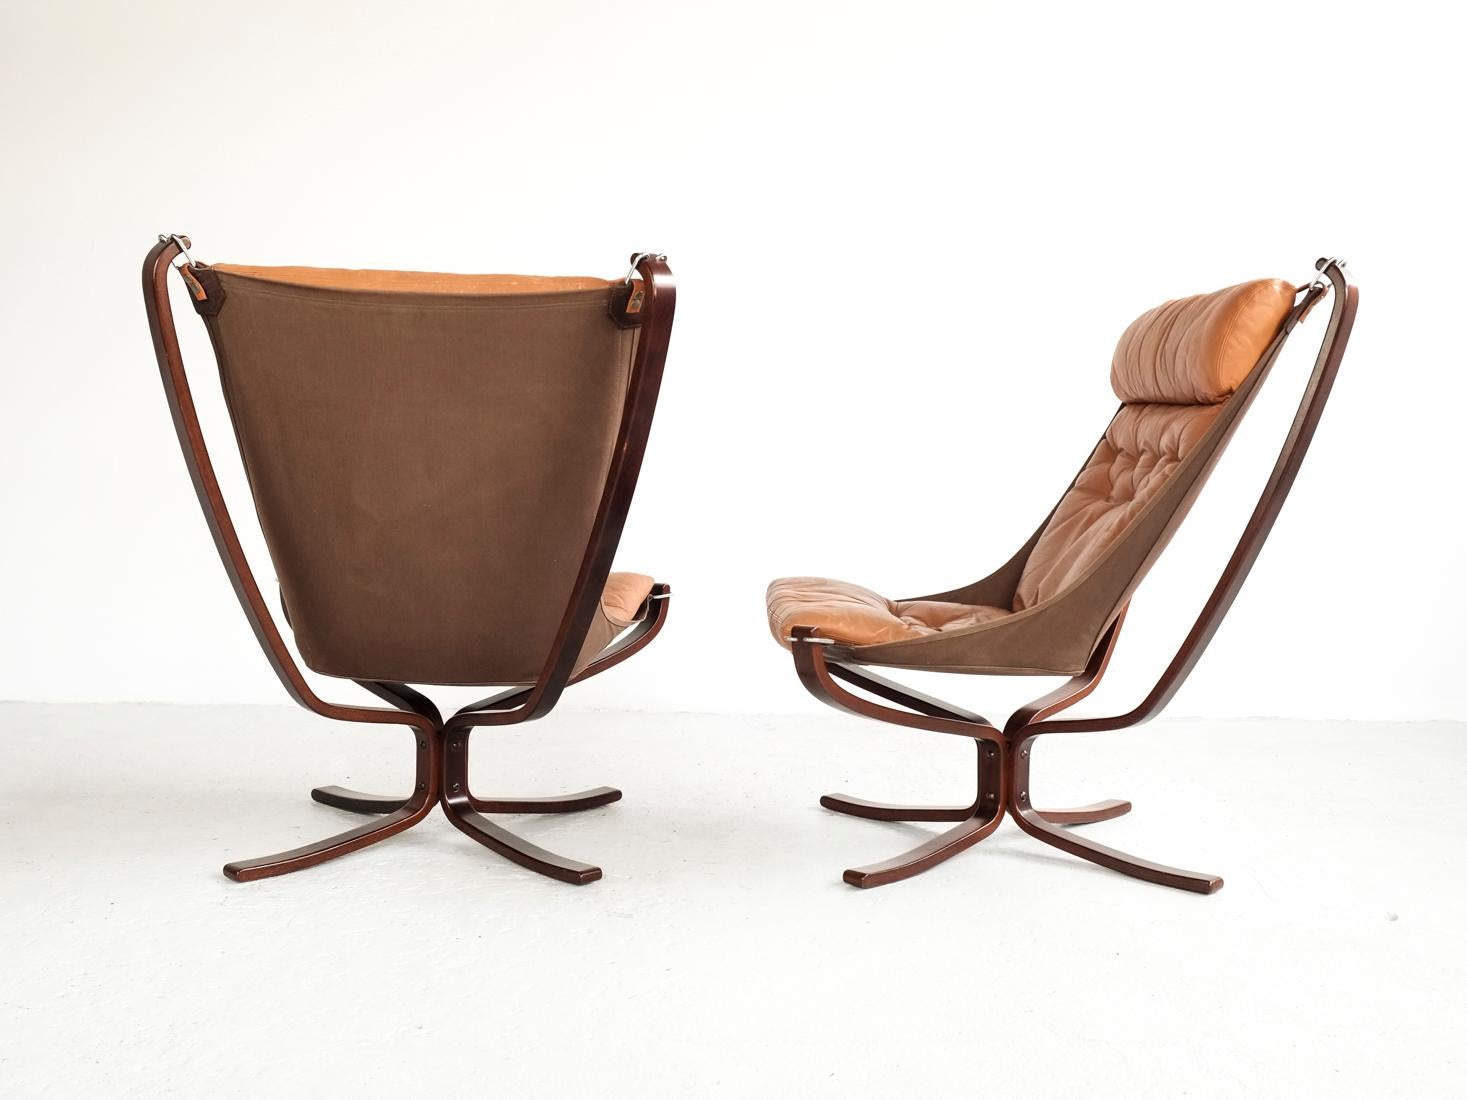 Dyed Midcentury Pair of High-Back Falcon Chairs by Sigurd Ressell for Vatne Møbler